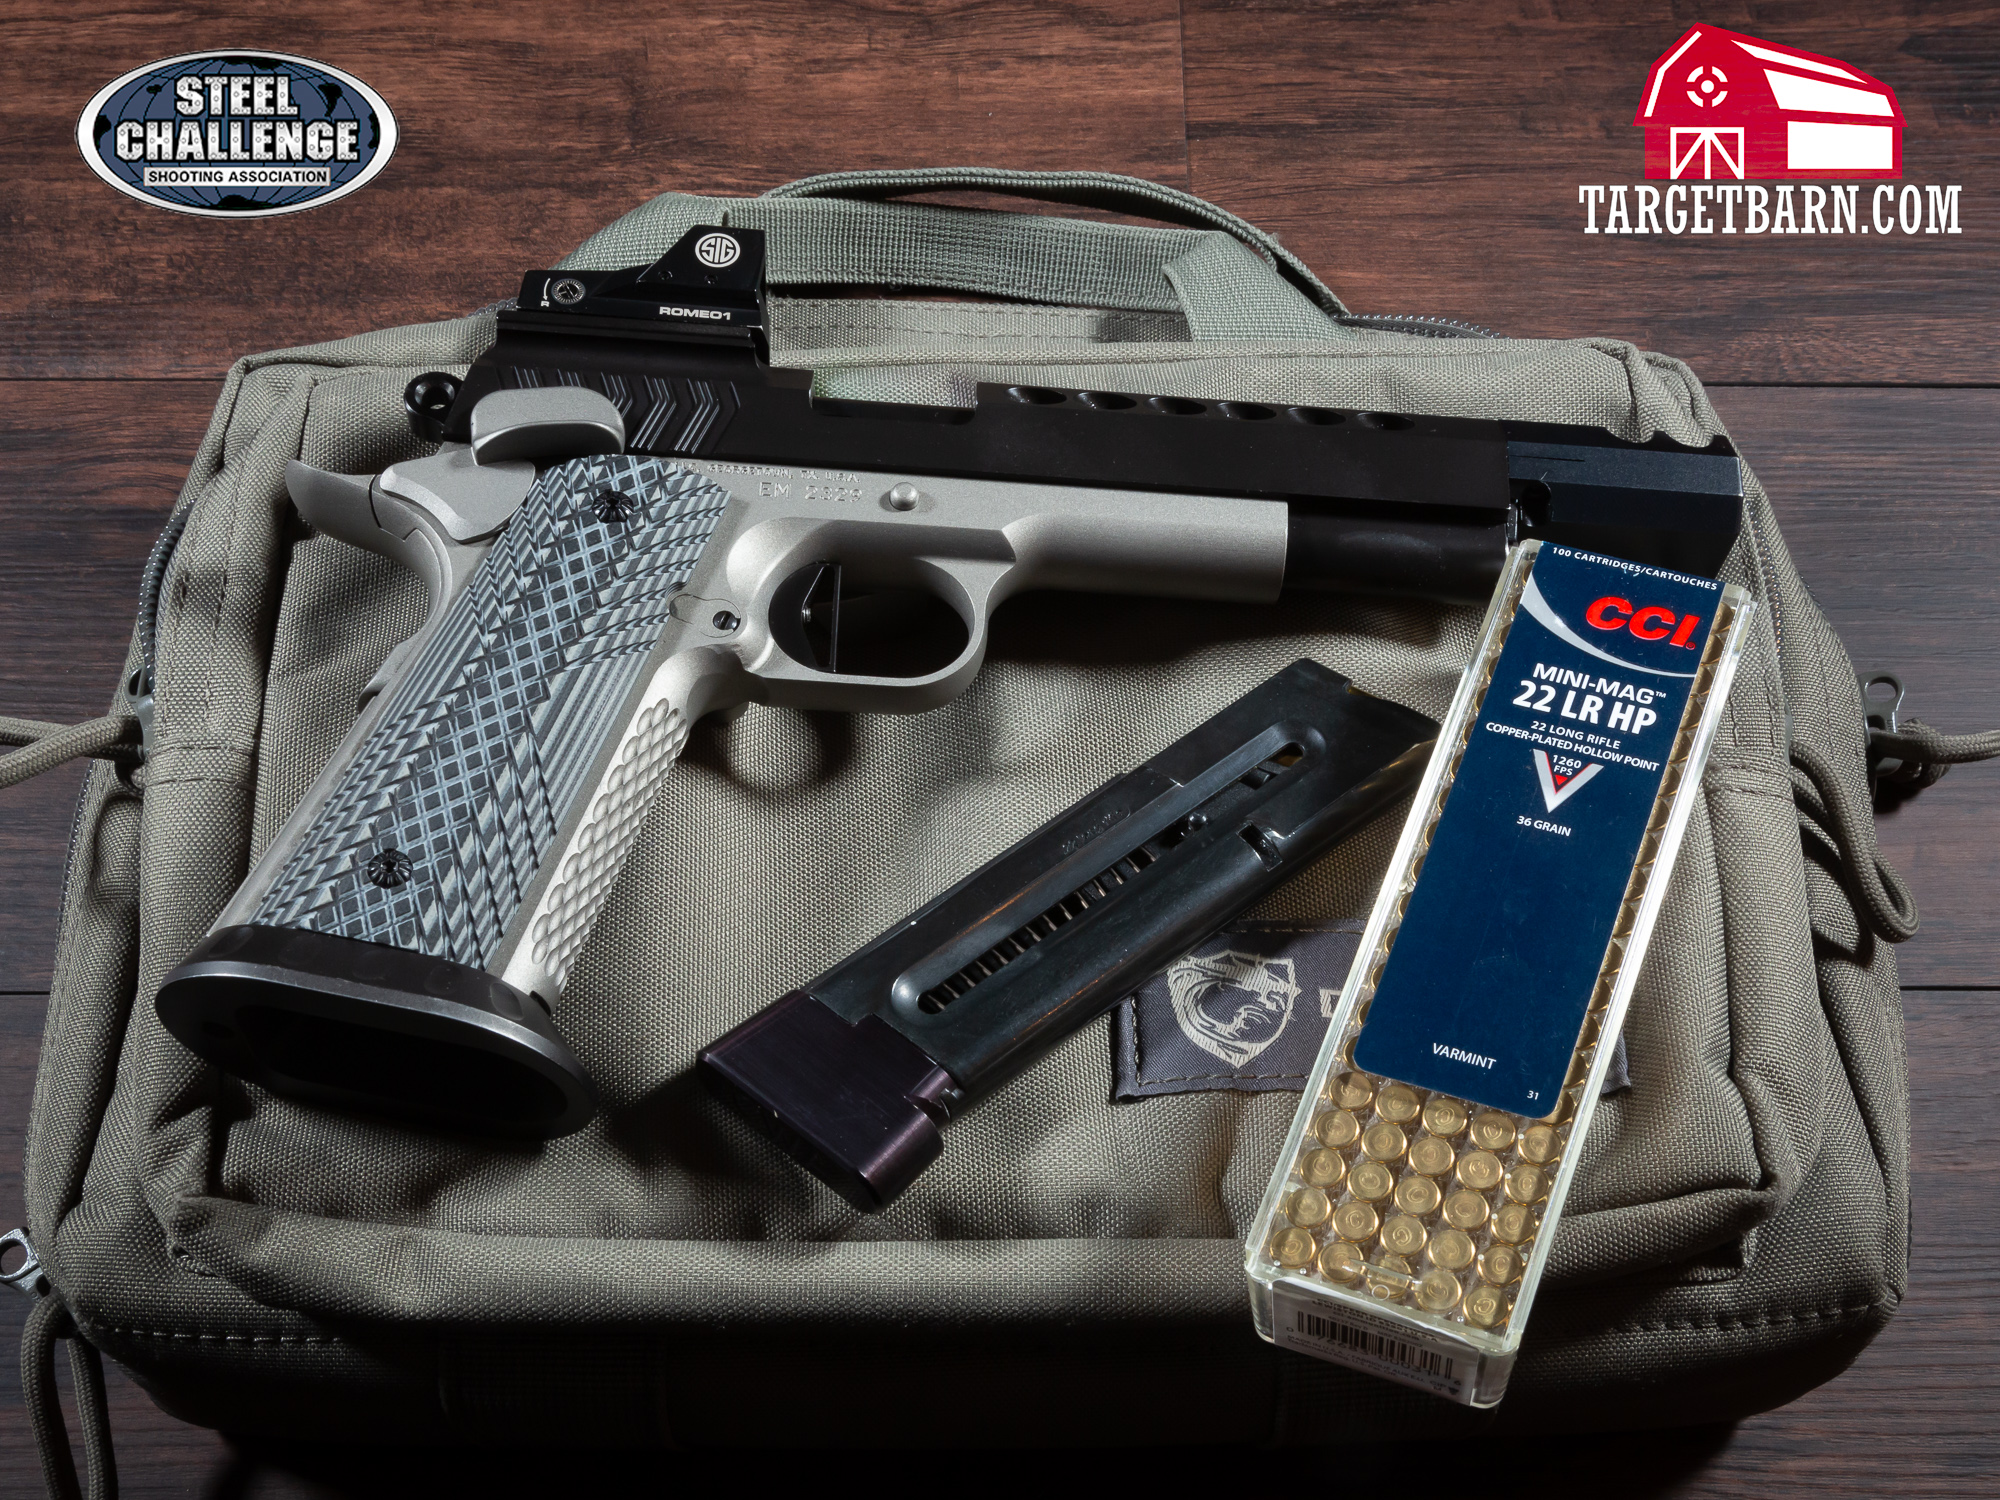 a rimfire pistol, magazine, and ammo for steel challenge